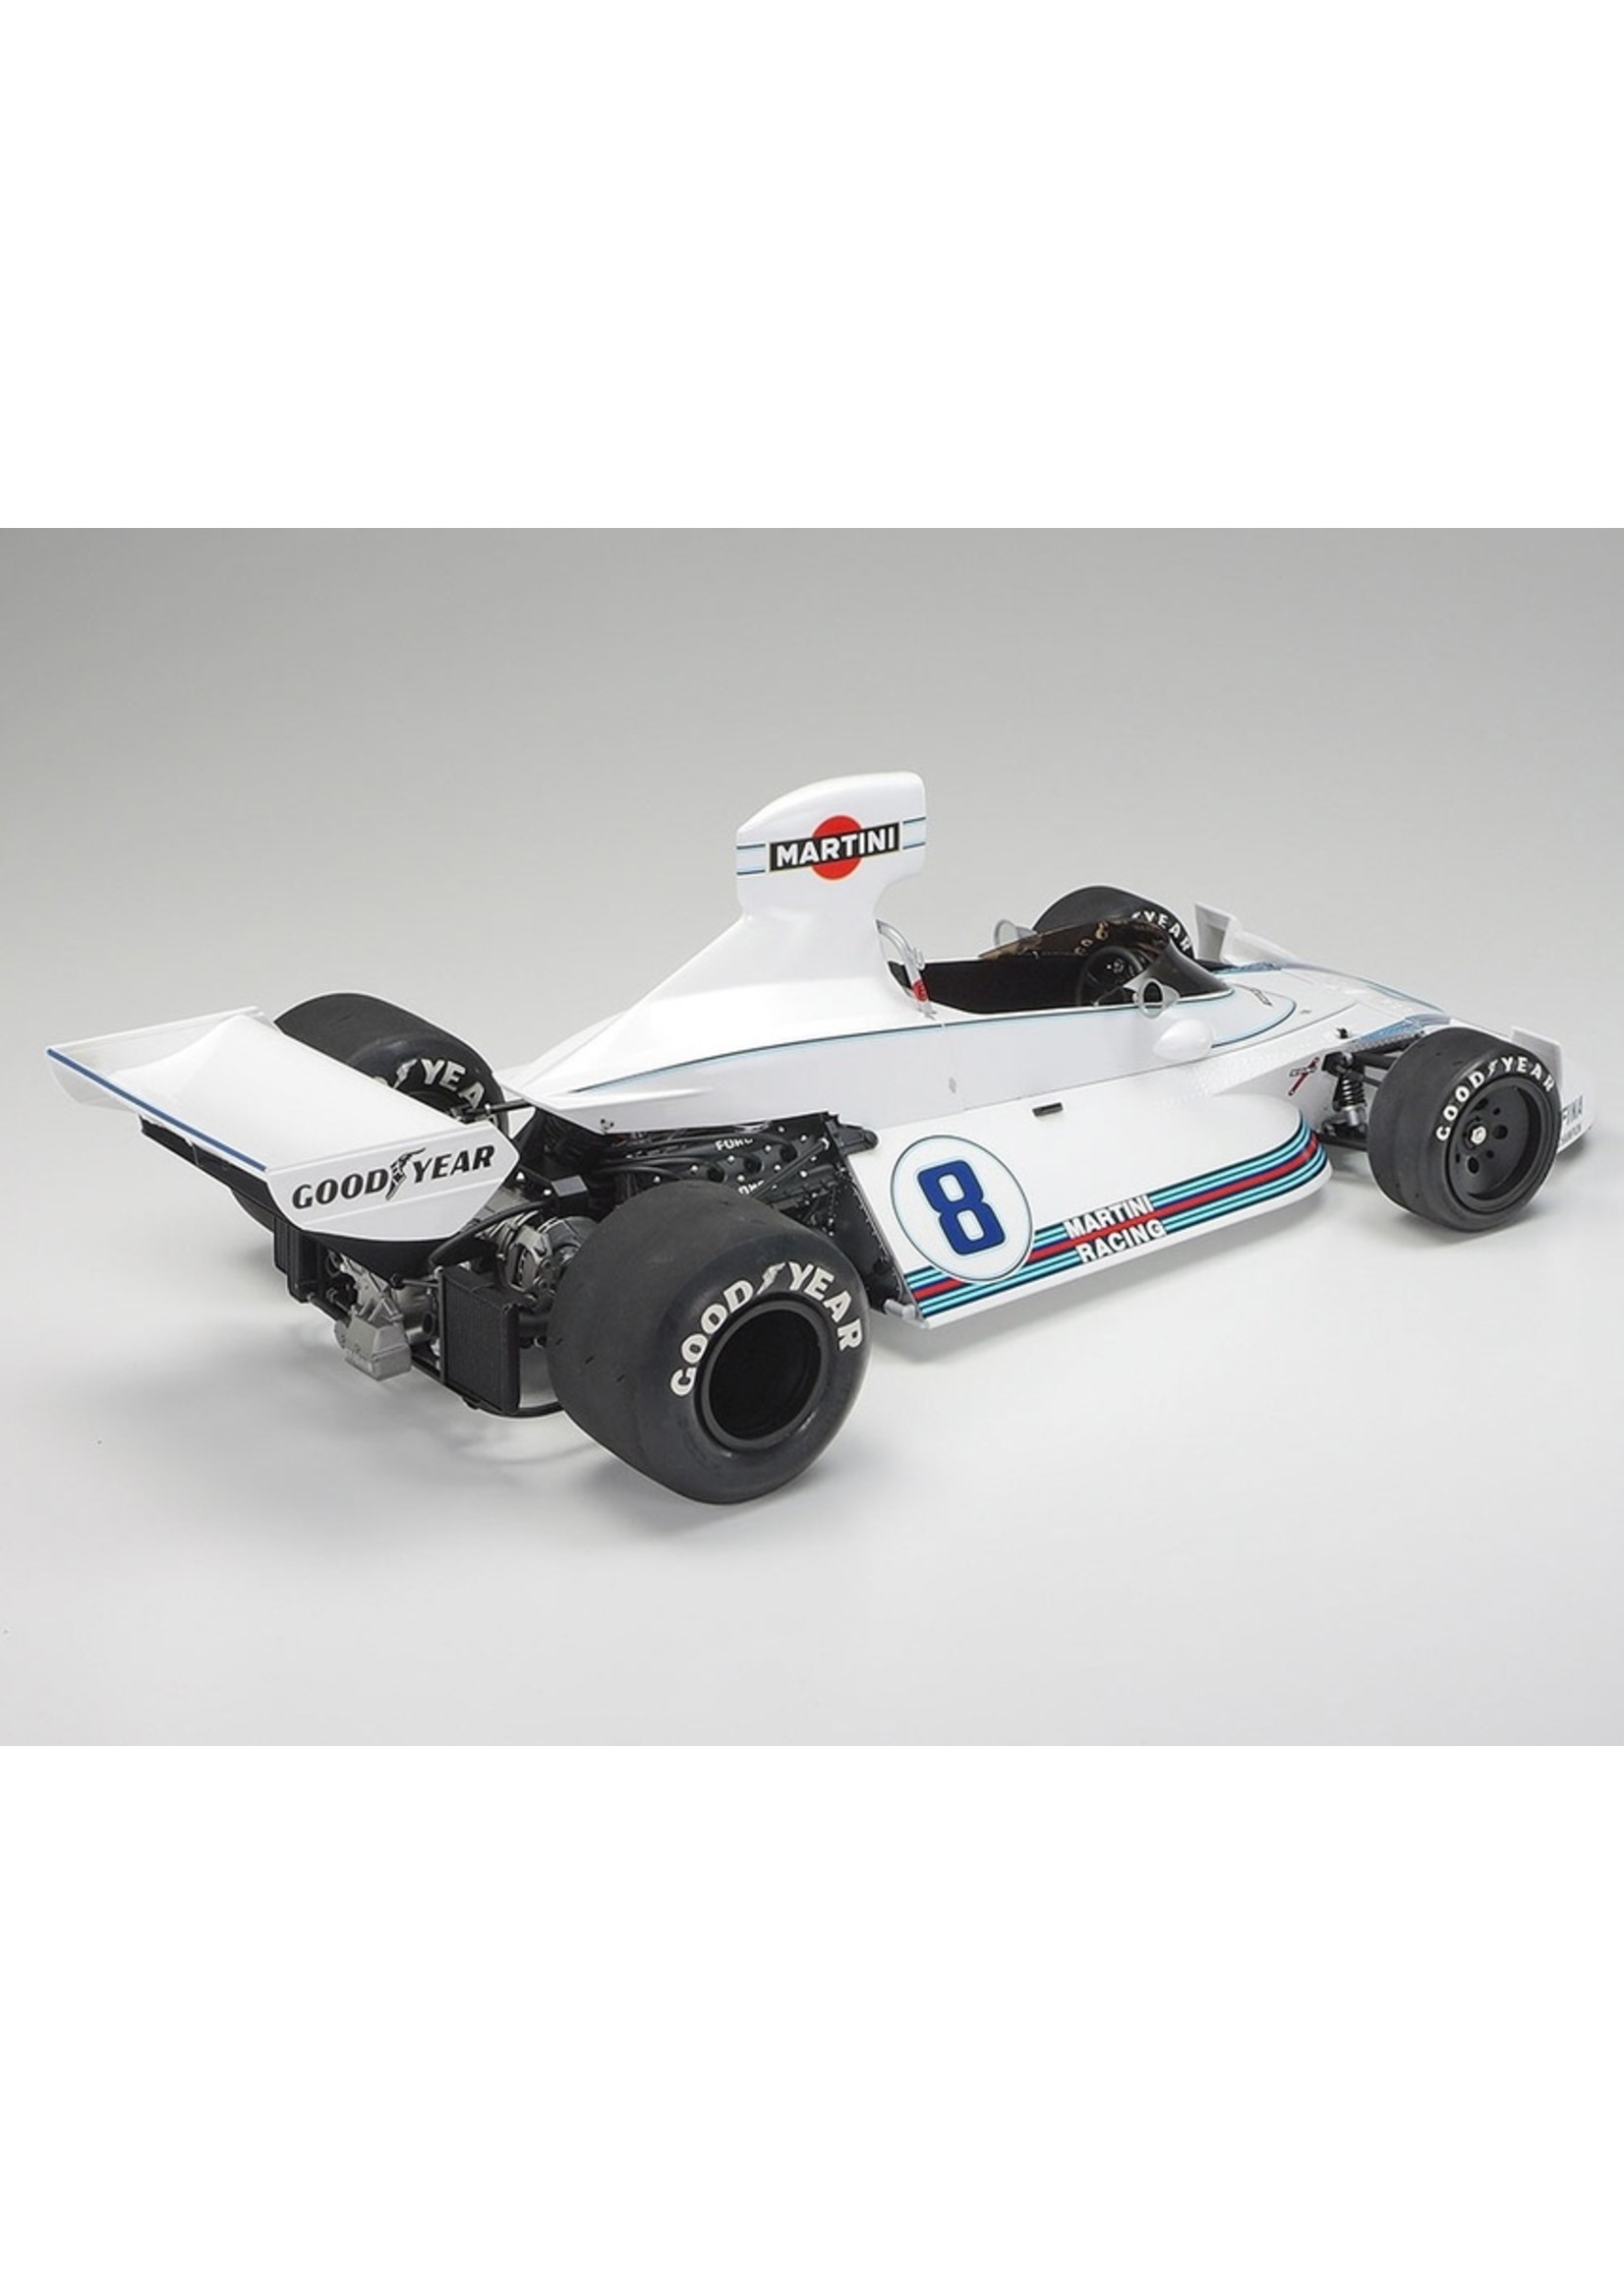 1:43 Scale Model of a Brabham BT44B F1 Car as Raced by Carlos Pace